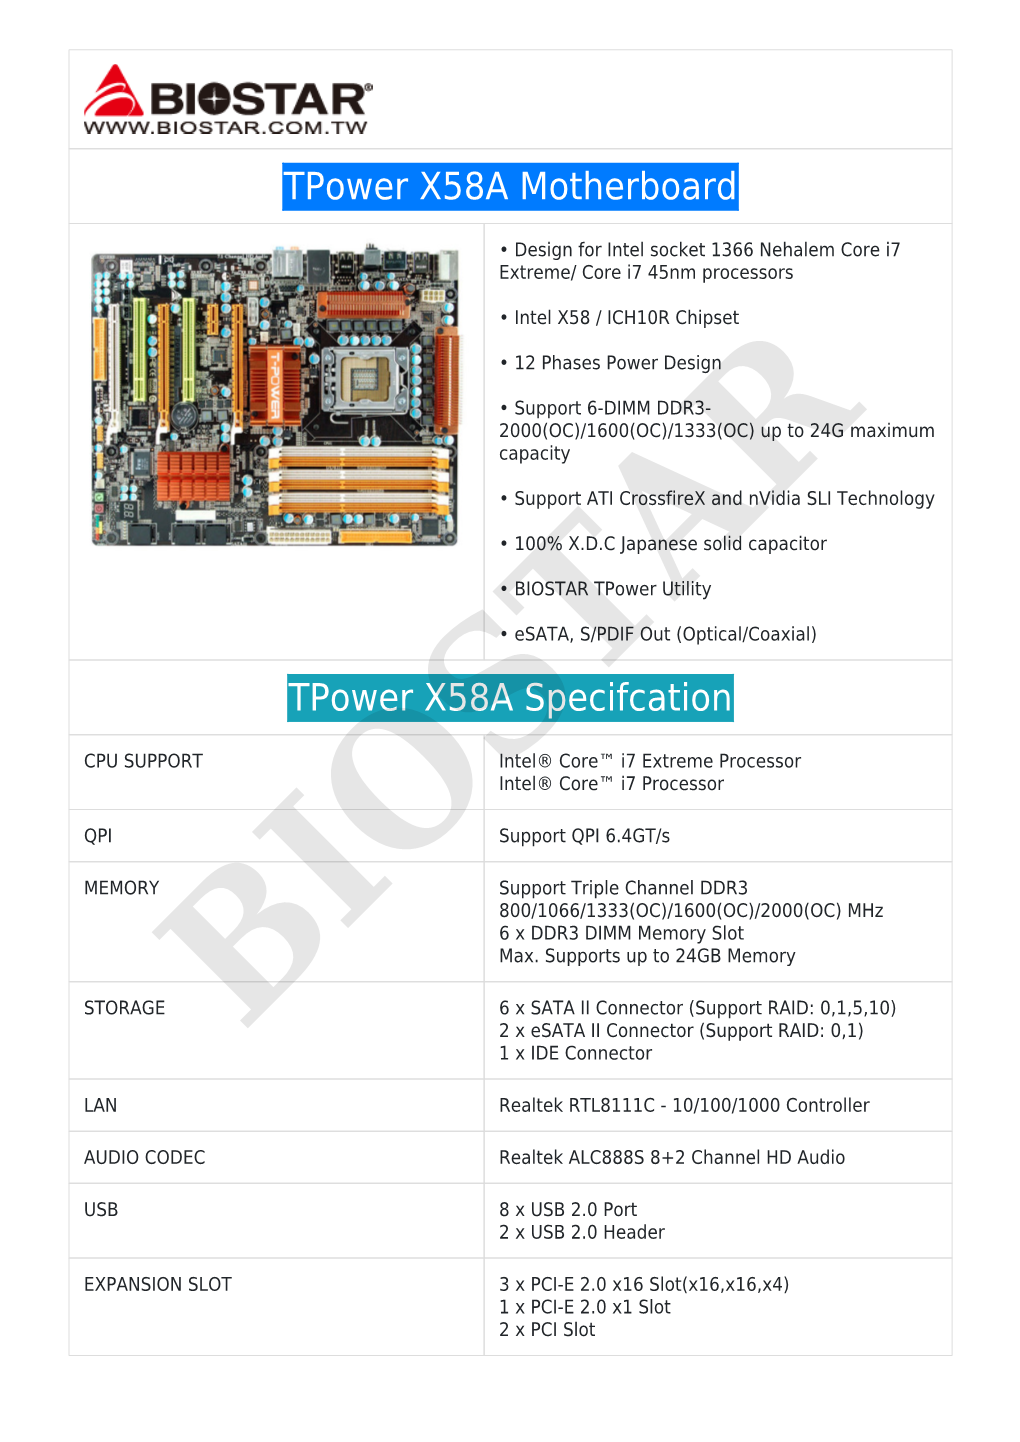 Tpower X58A Motherboard